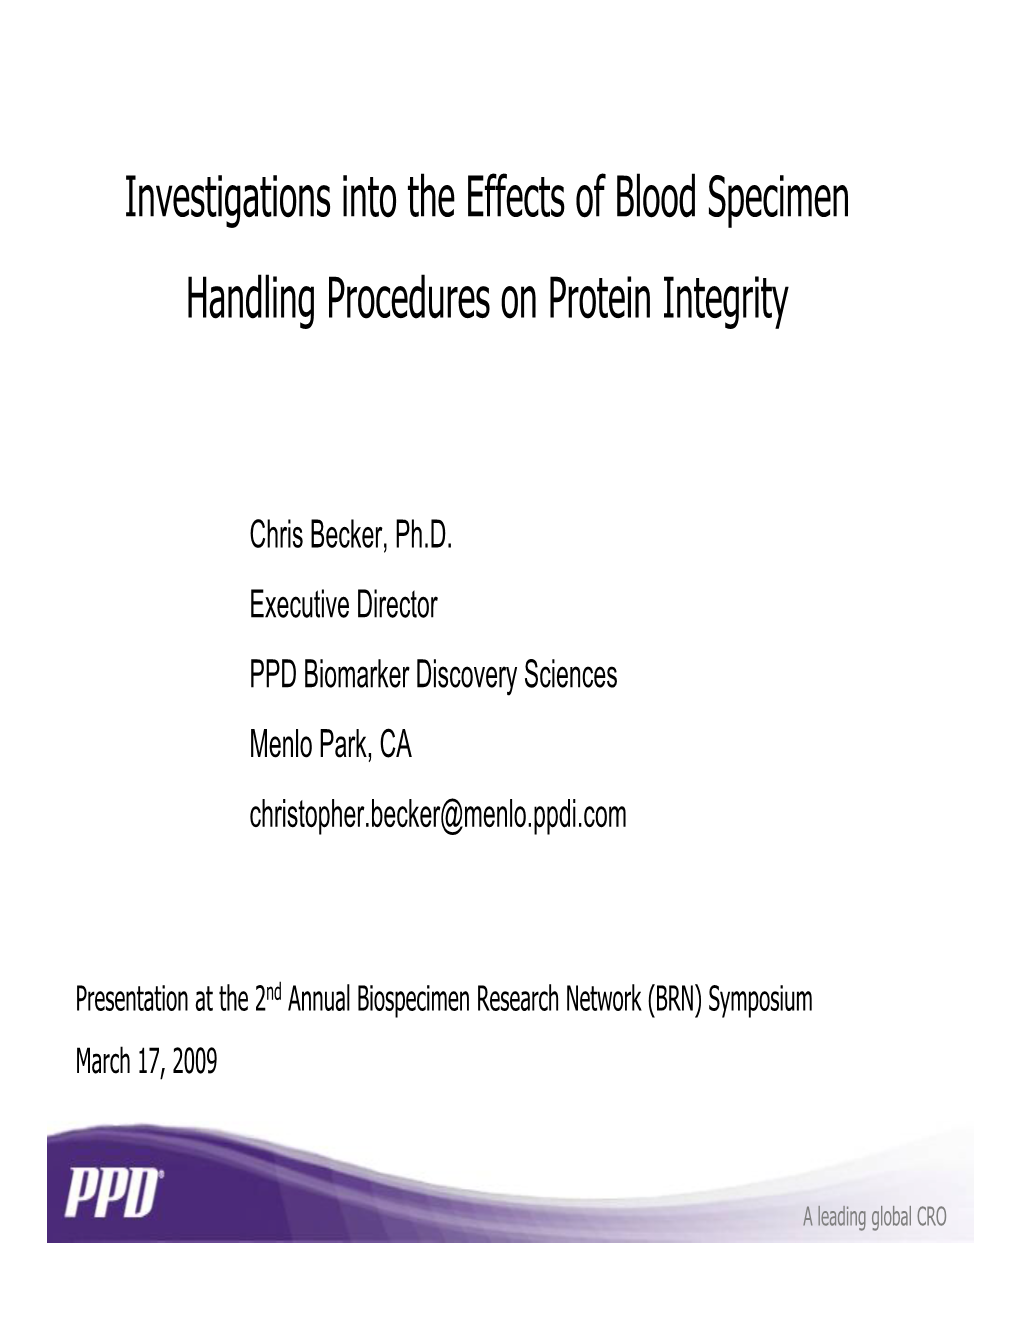 Investigations Into the Effects of Blood Specimen Handling Procedures on Protein Integrity